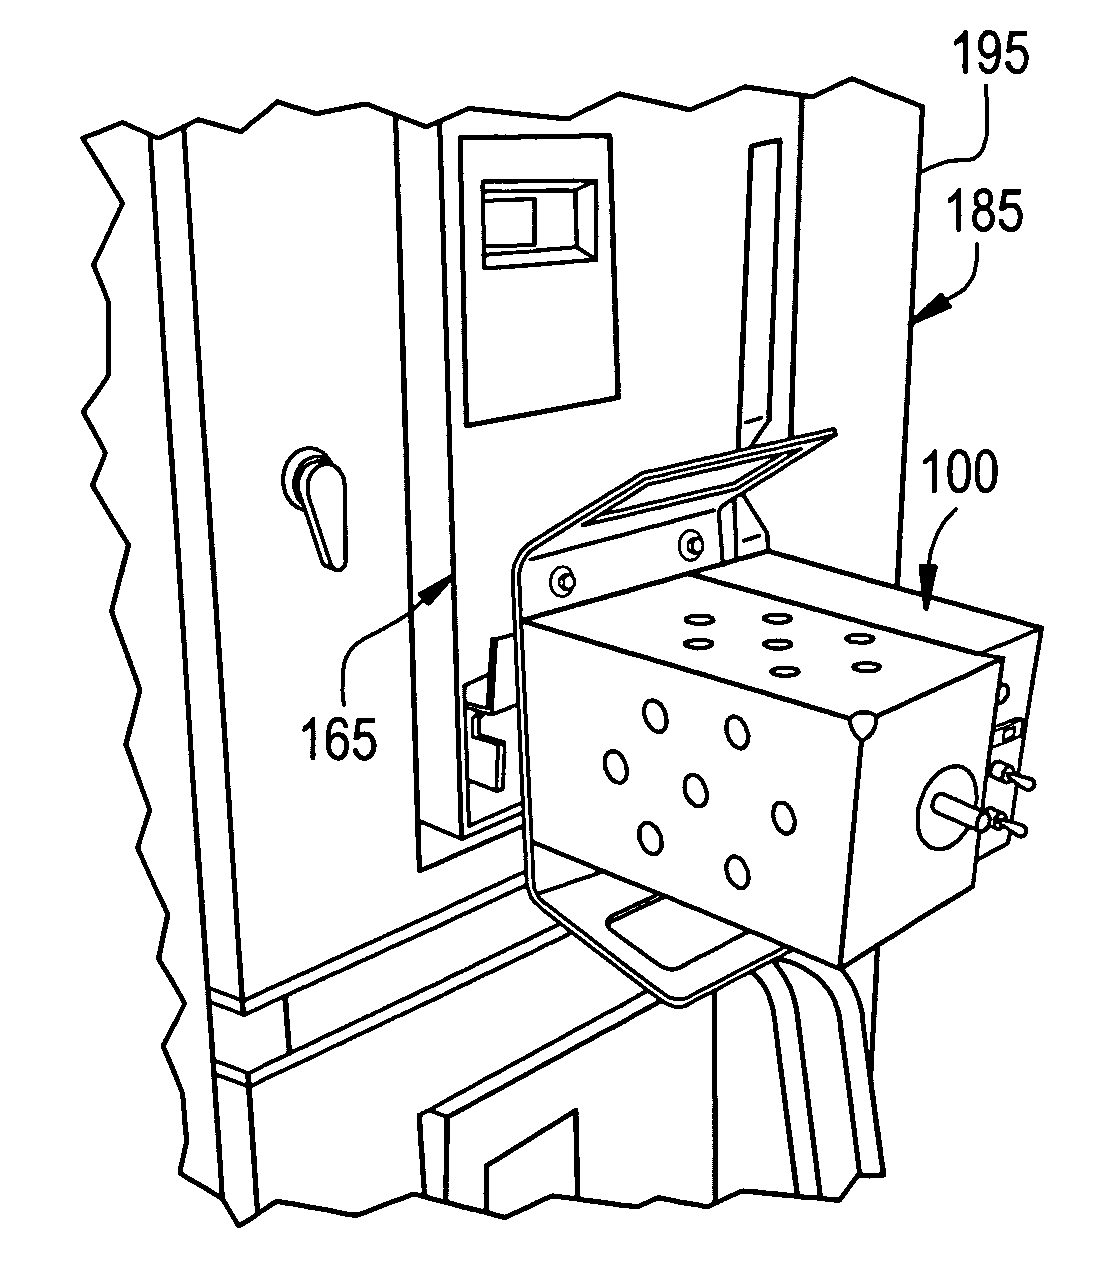 Apparatus for racking circuit breakers into and out of switchgear